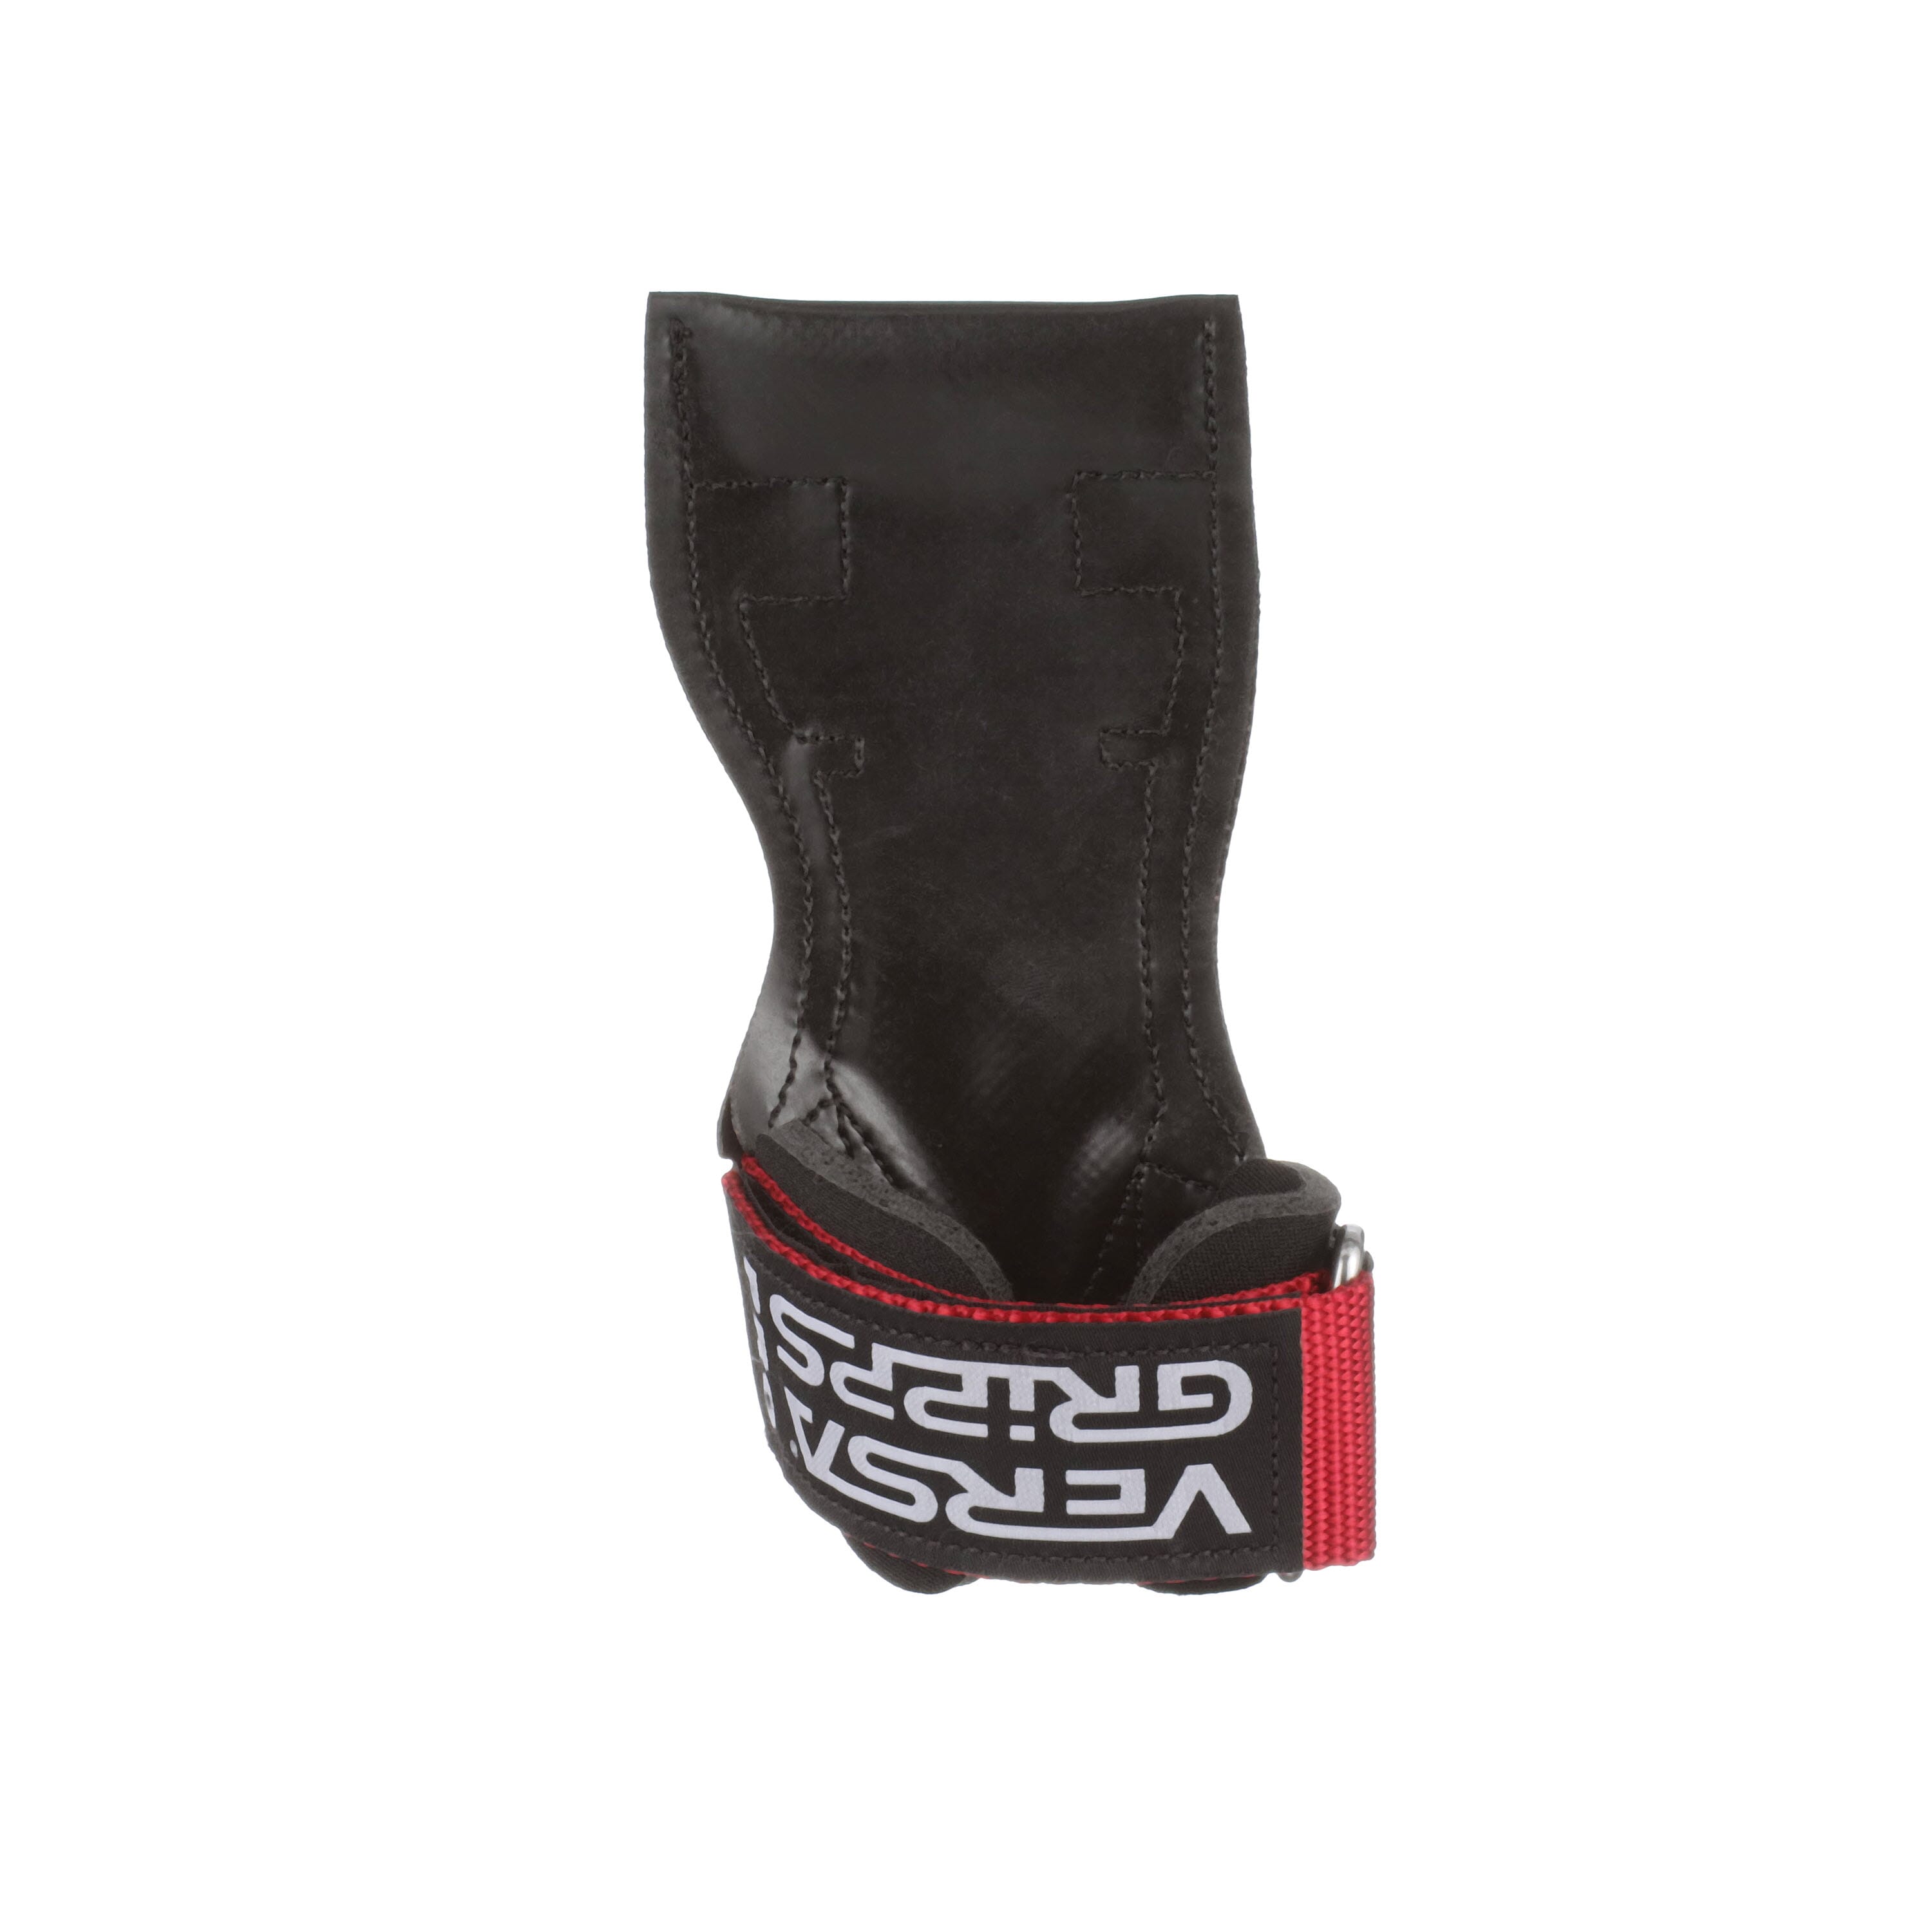 VERSA GRIPPS PRO Authentic Made in The USA The Best Training Accessory in The World 